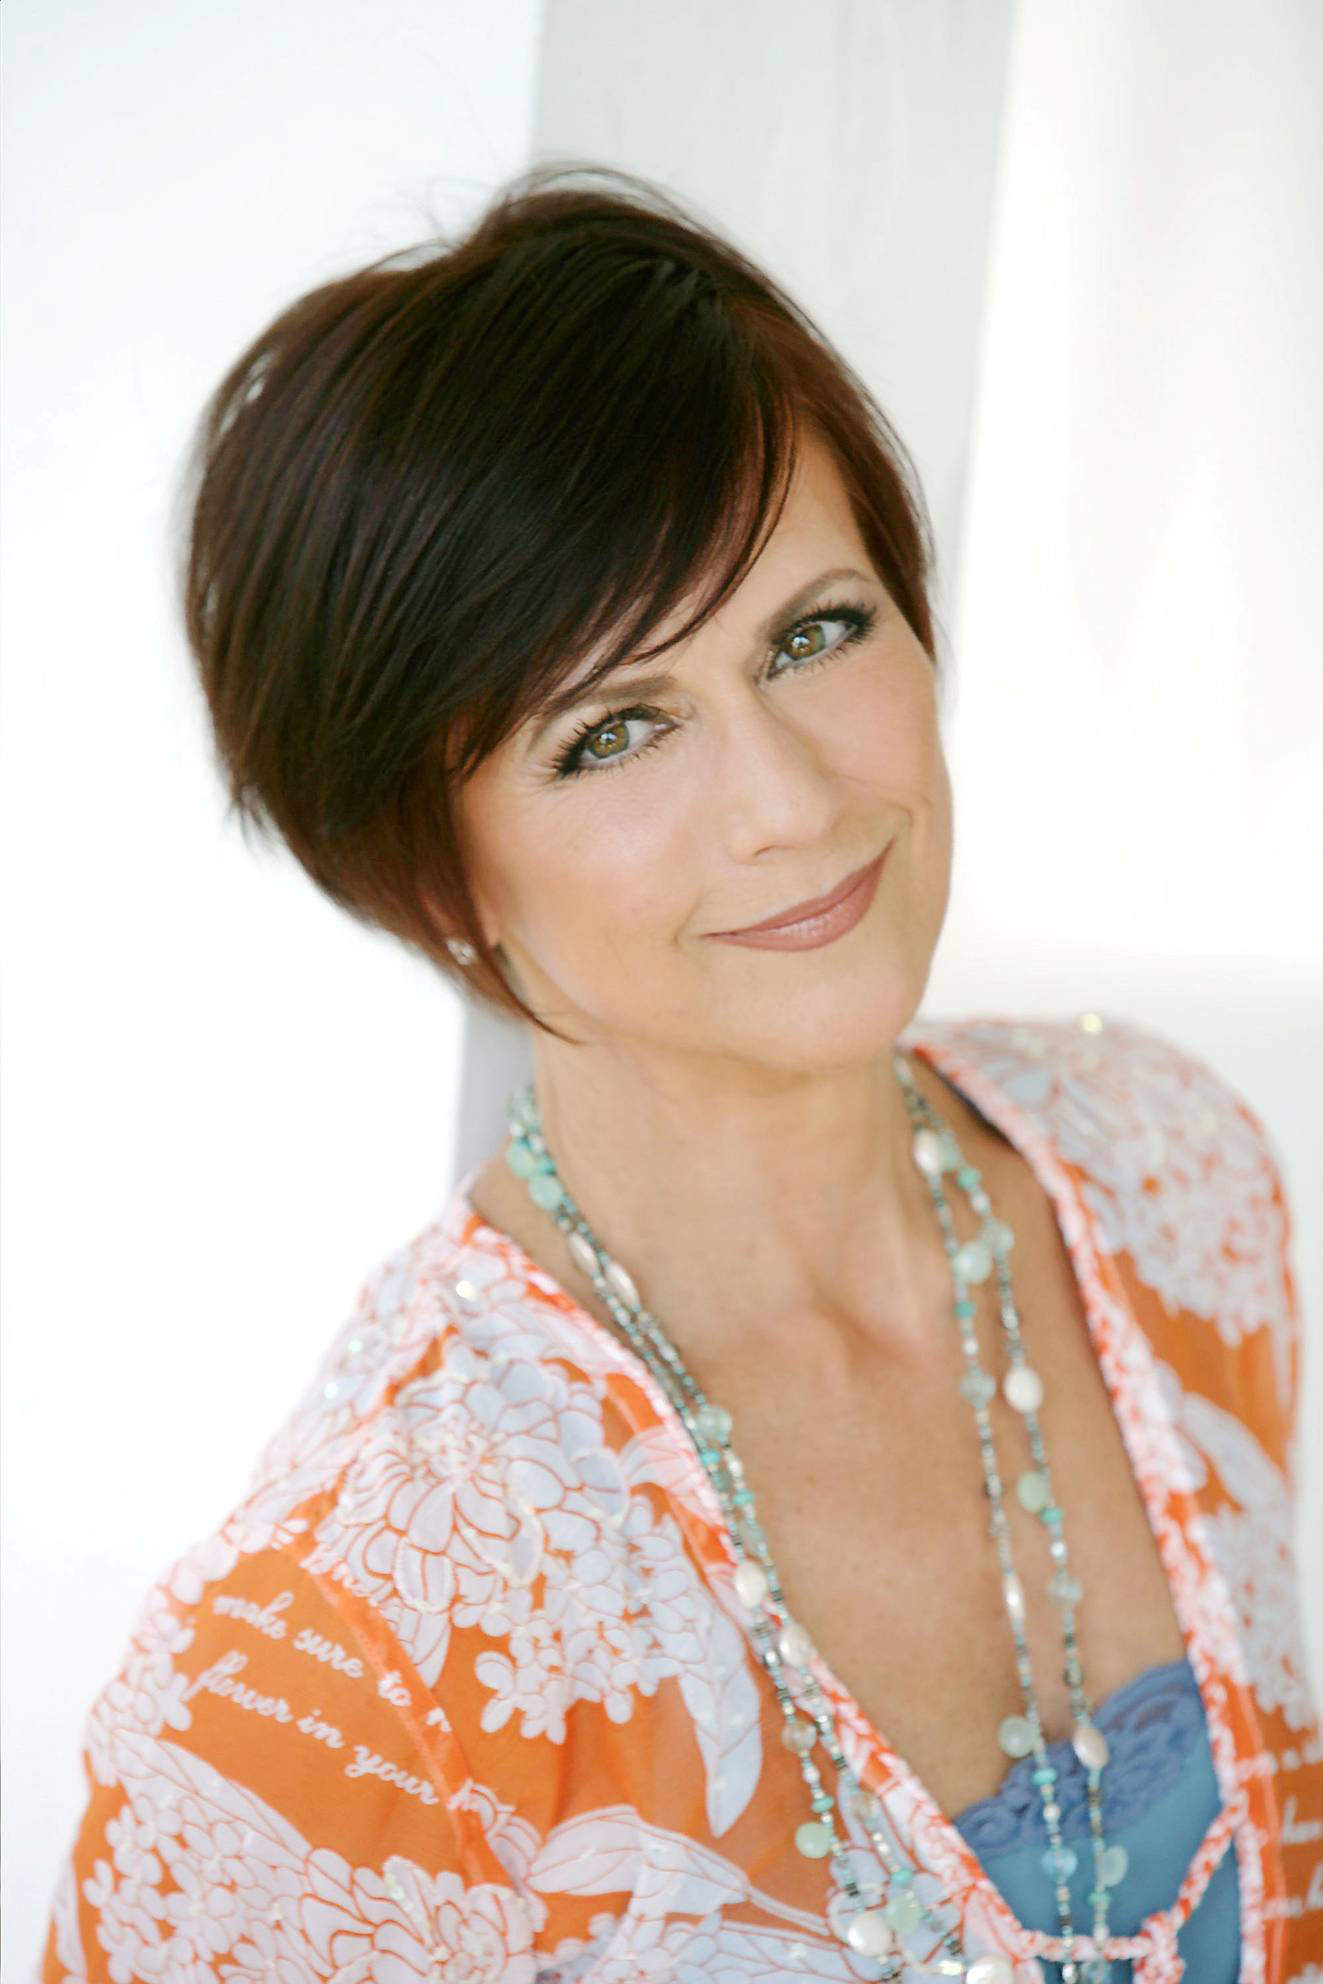 Colleen Zenk plays Polly Wyeth 1